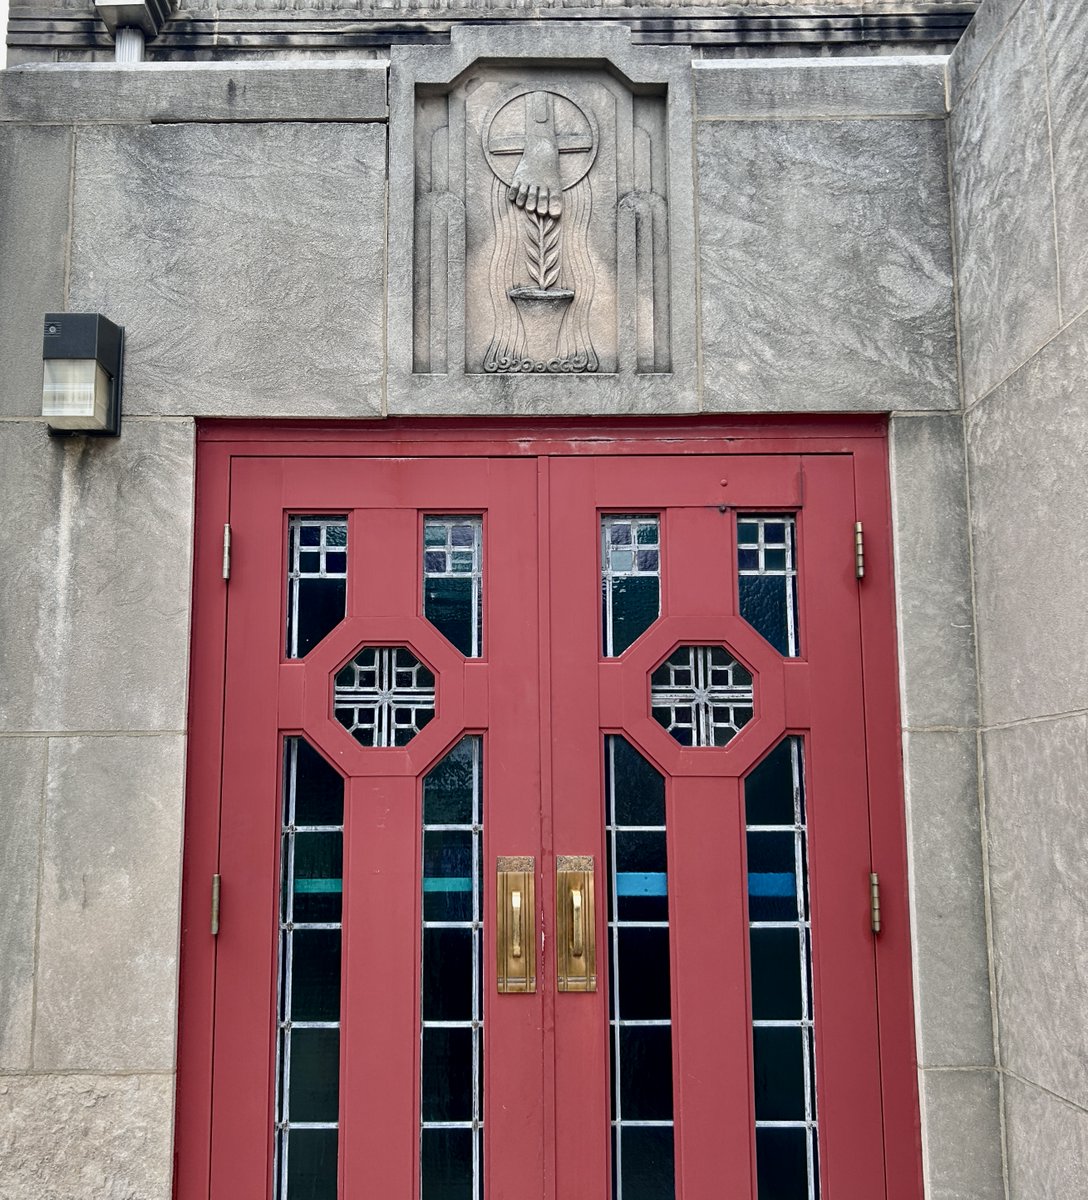 An Art Deco entryway to St Mary Magdalen (1940) in Southampton, St Louis